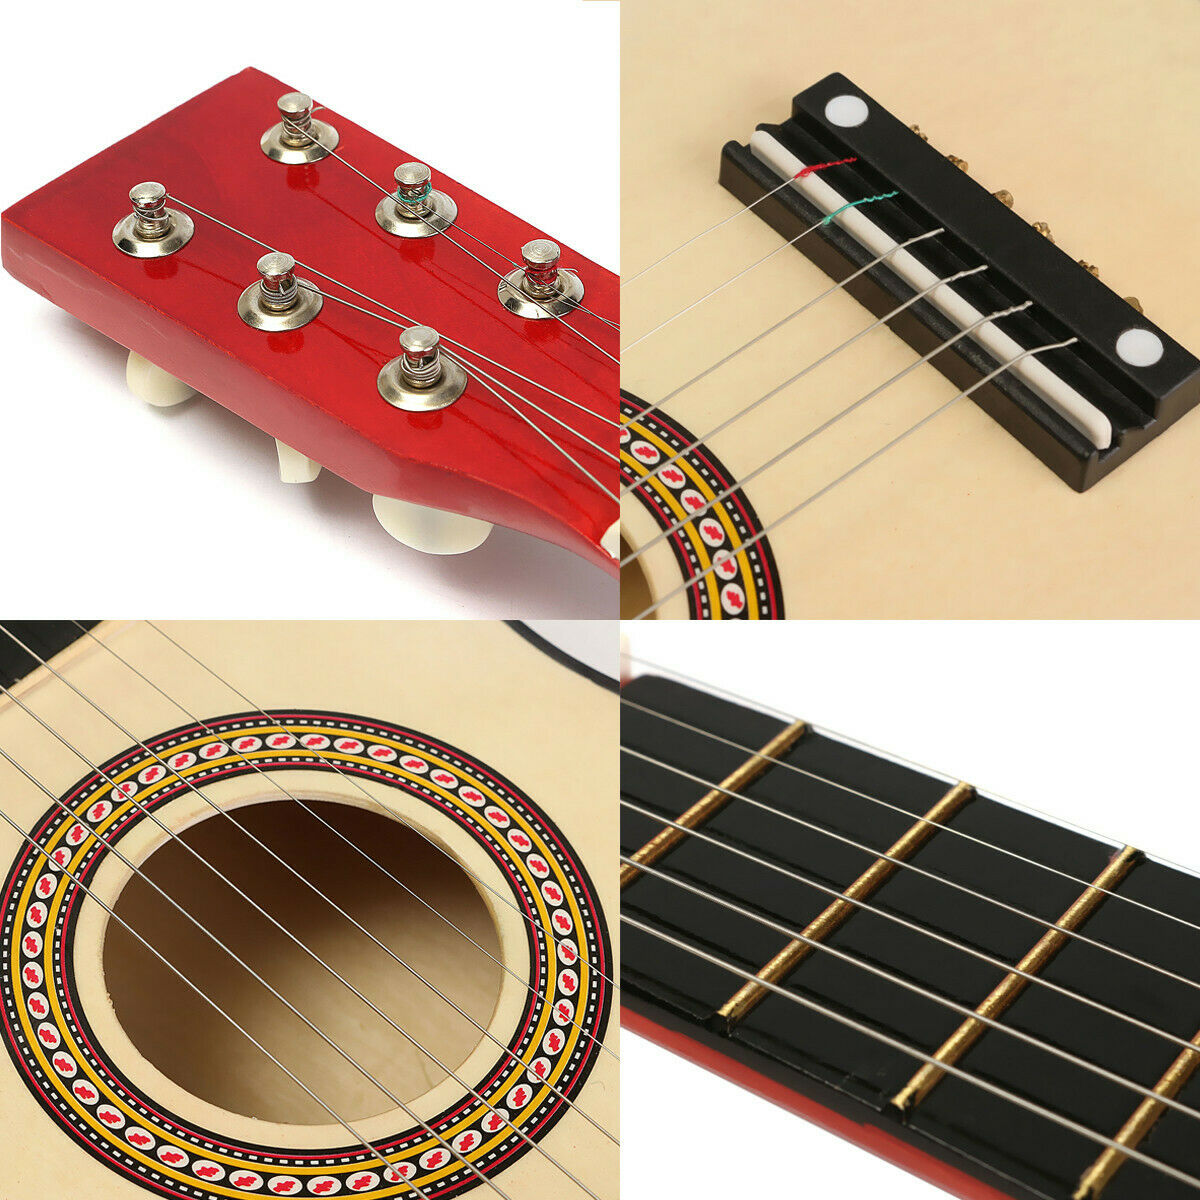 23" Wooden Beginners Practice W/ 6 String Red Acoustic Guitar Children Toys Gift